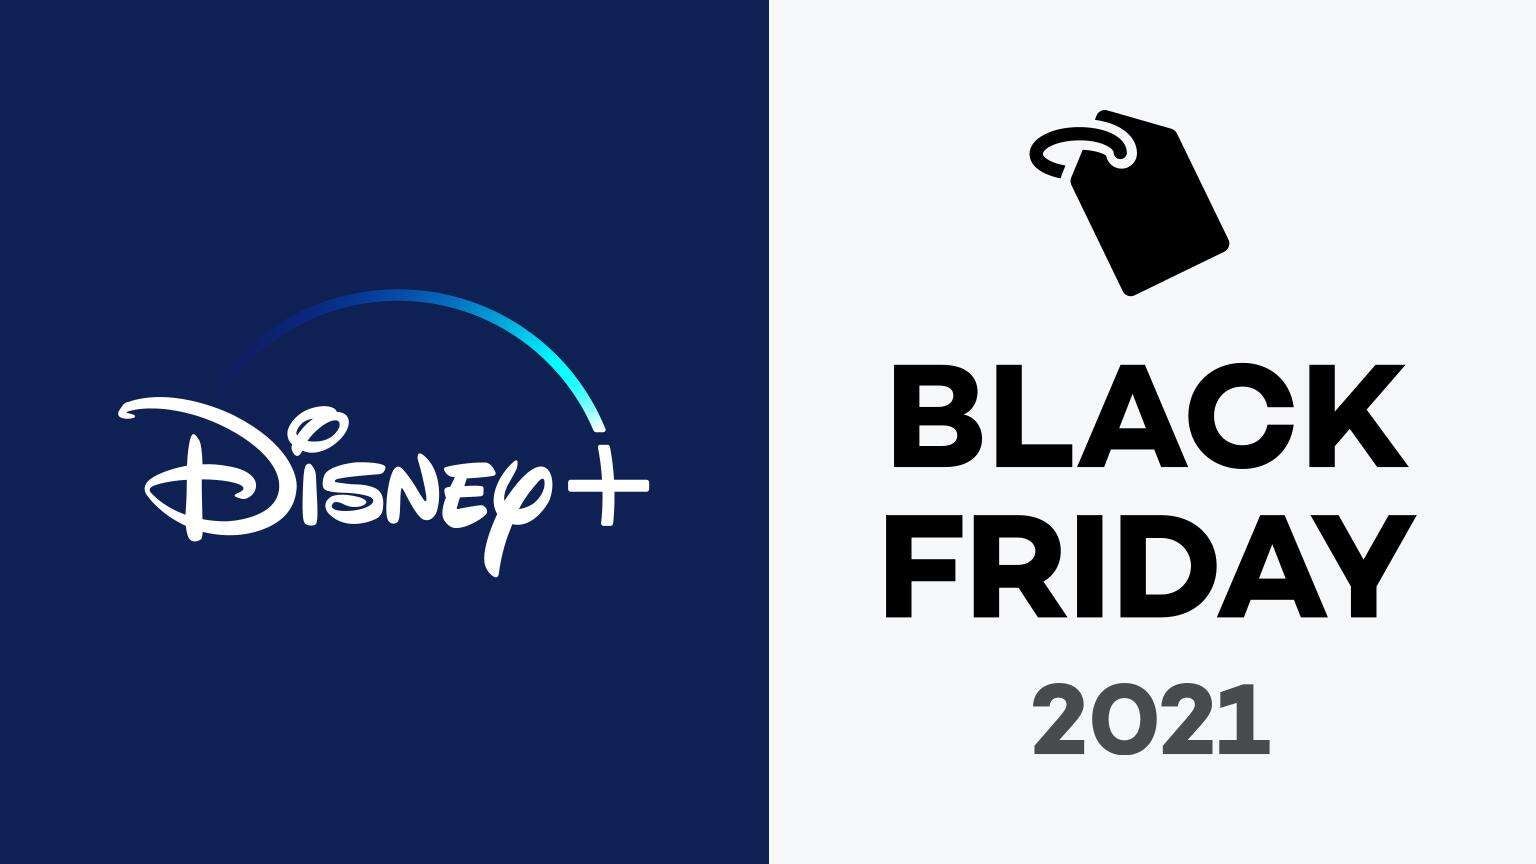 Disney+ Black Friday 2021 Deals What Are the Best Ways to Save on